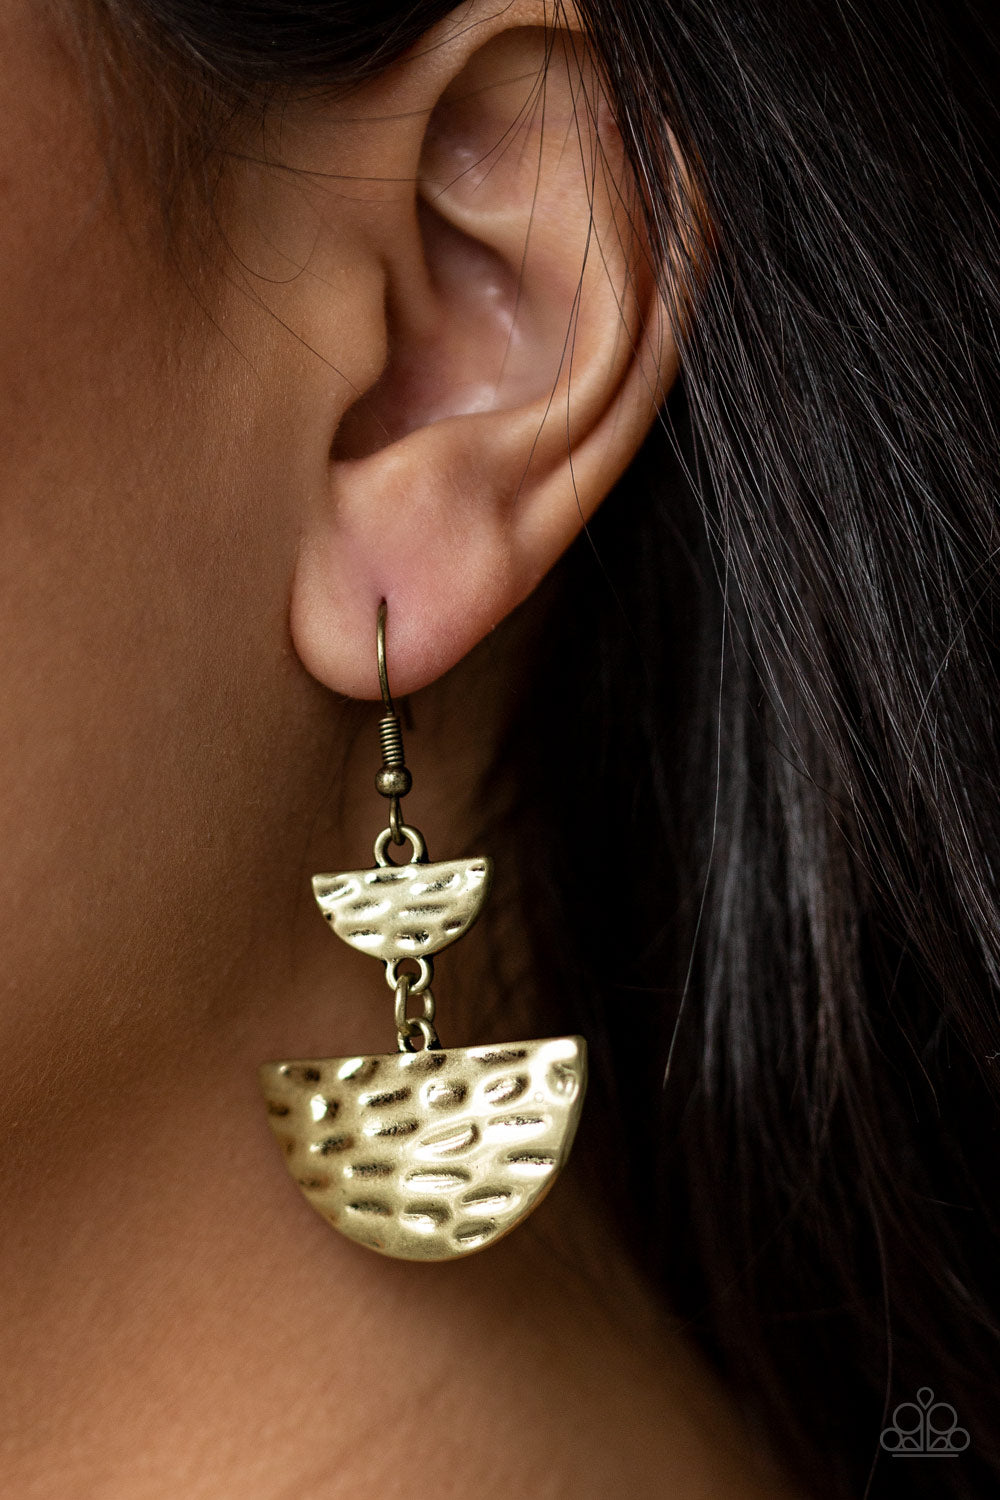 TRIASSIC TRIANGLES - BRASS TEXTURED CRESCENT EARRINGS